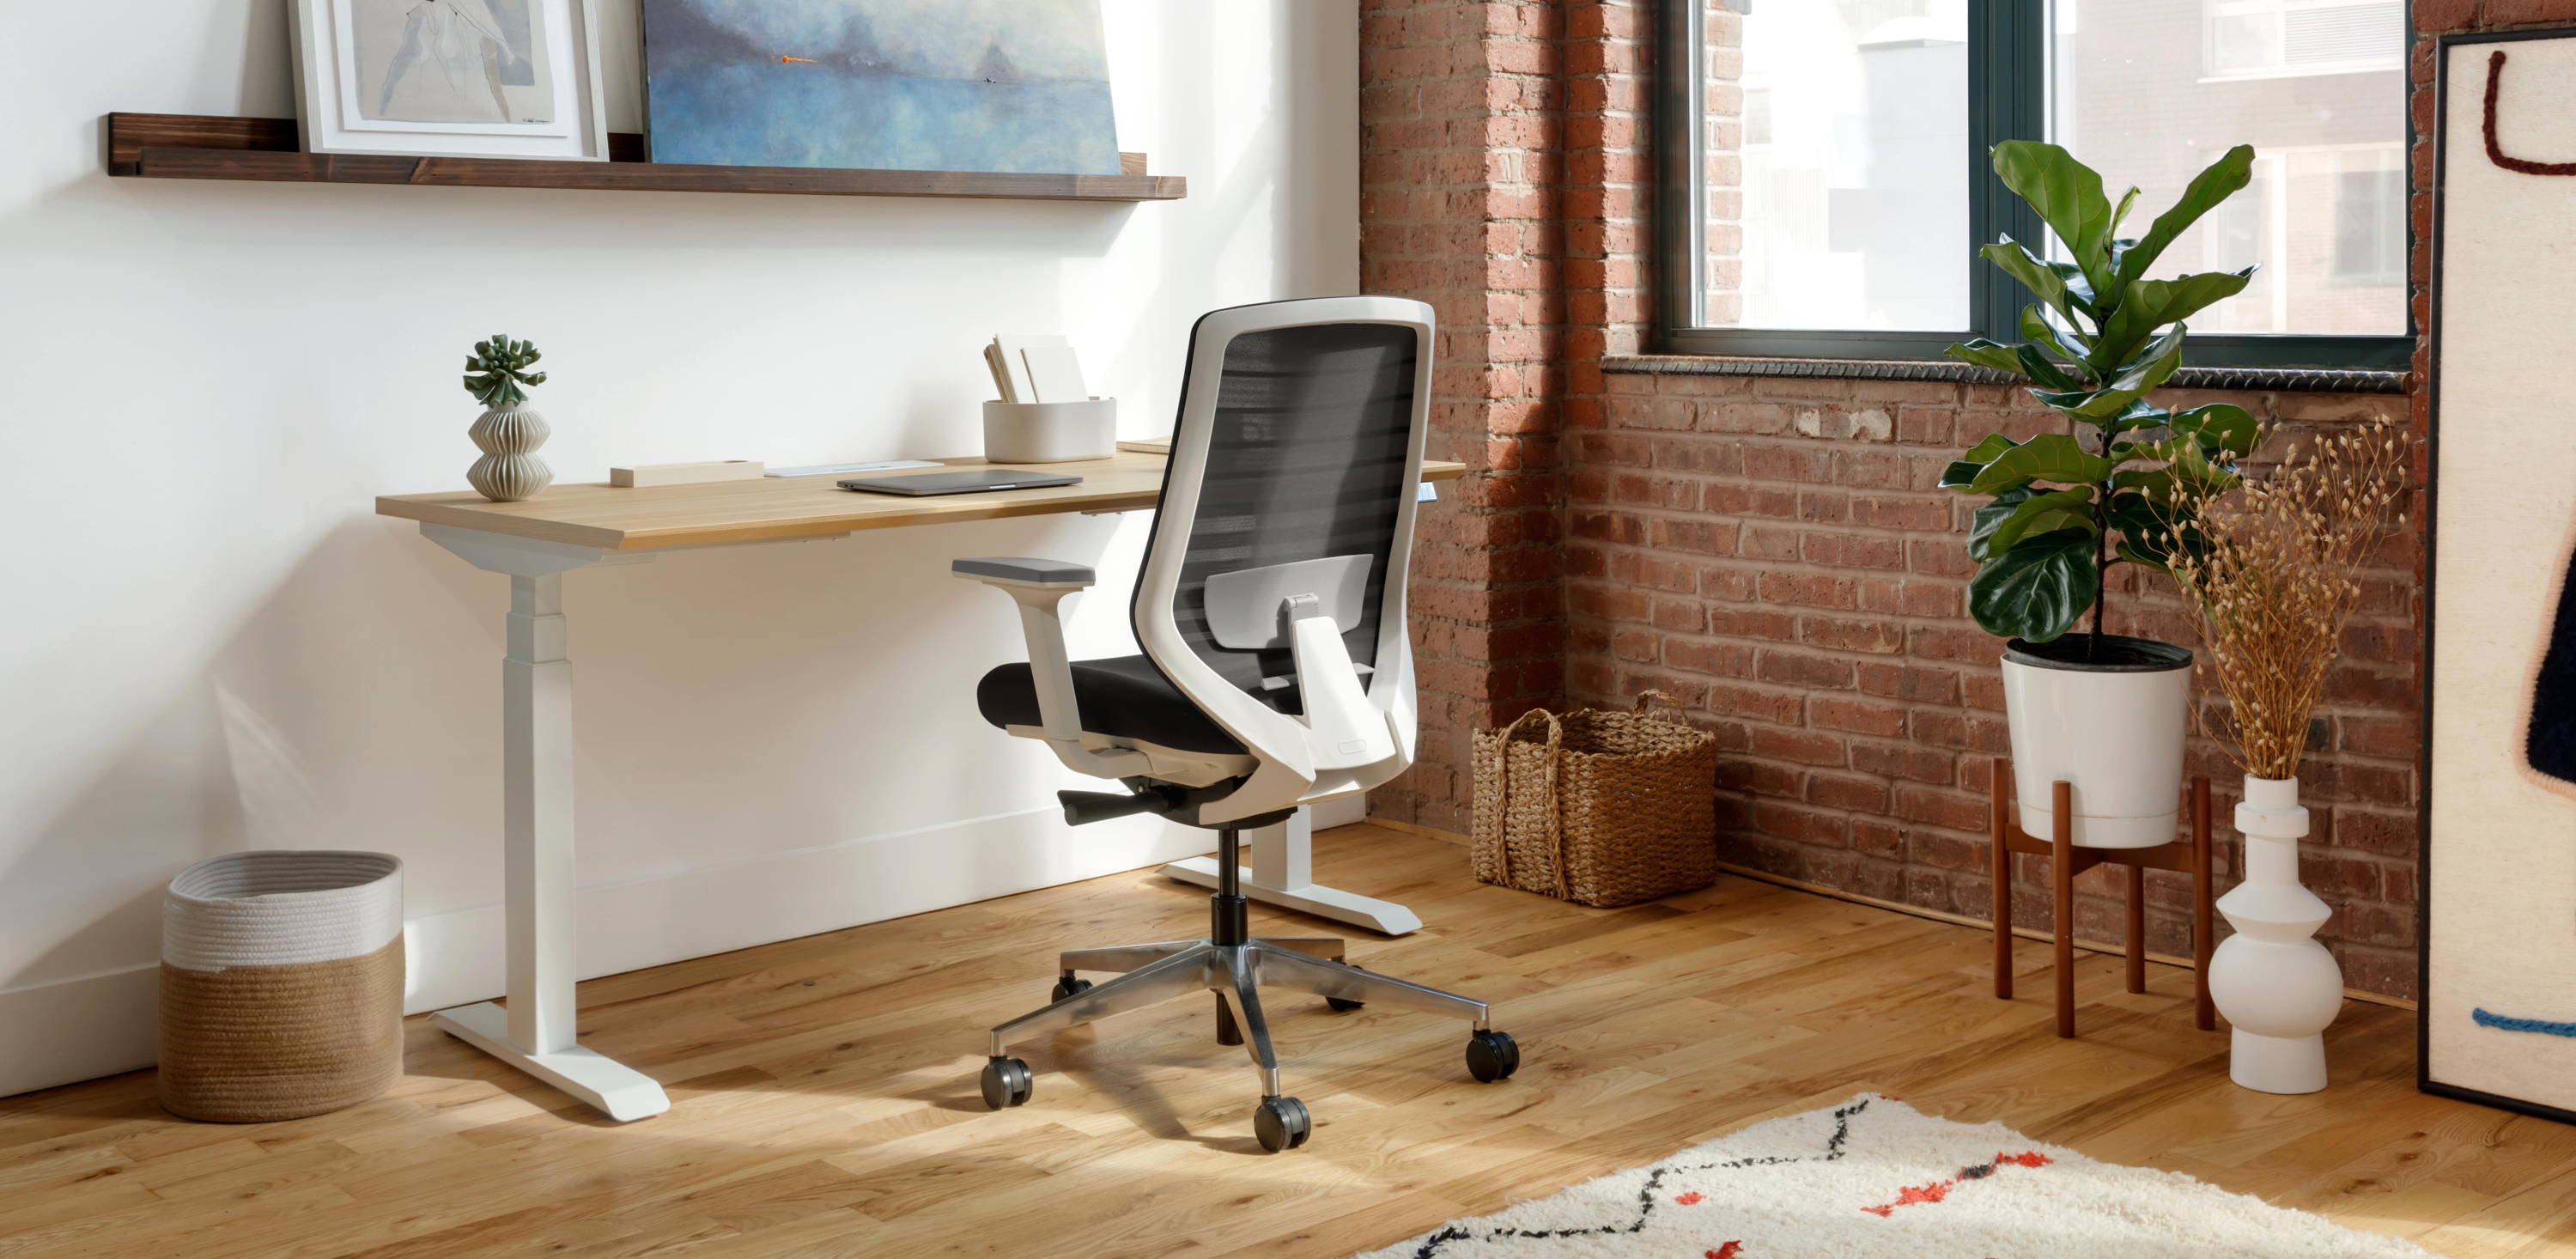 How to Find the Most Comfortable Office Chair for Long Hours